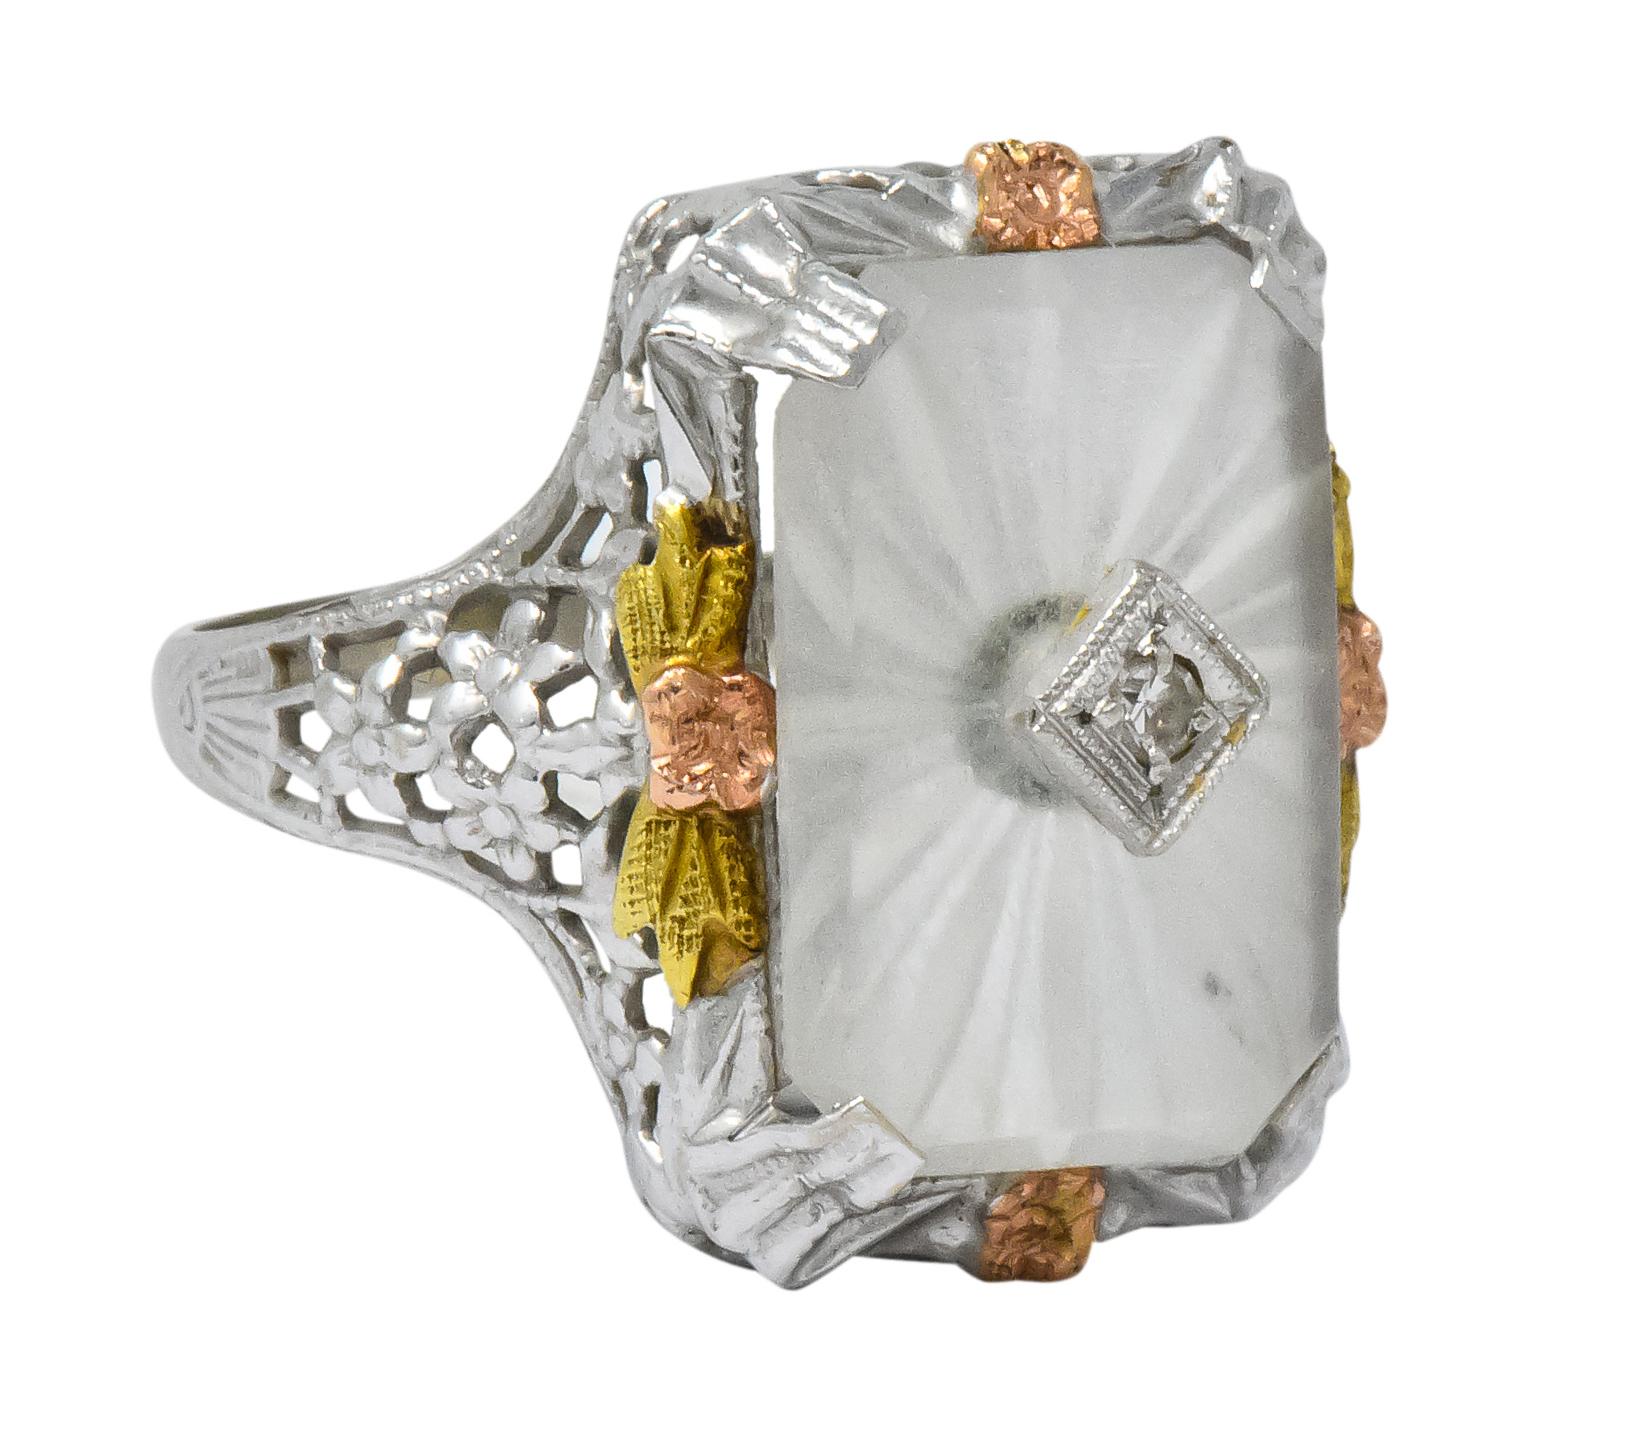 Centering a rectangular camphor glass tablet with a radiating frosted design, inset with a single cut diamond

Prong set and surrounded by rose gold flowers with green gold leaves

White gold gallery with pierced floral and foliate design

Stamped